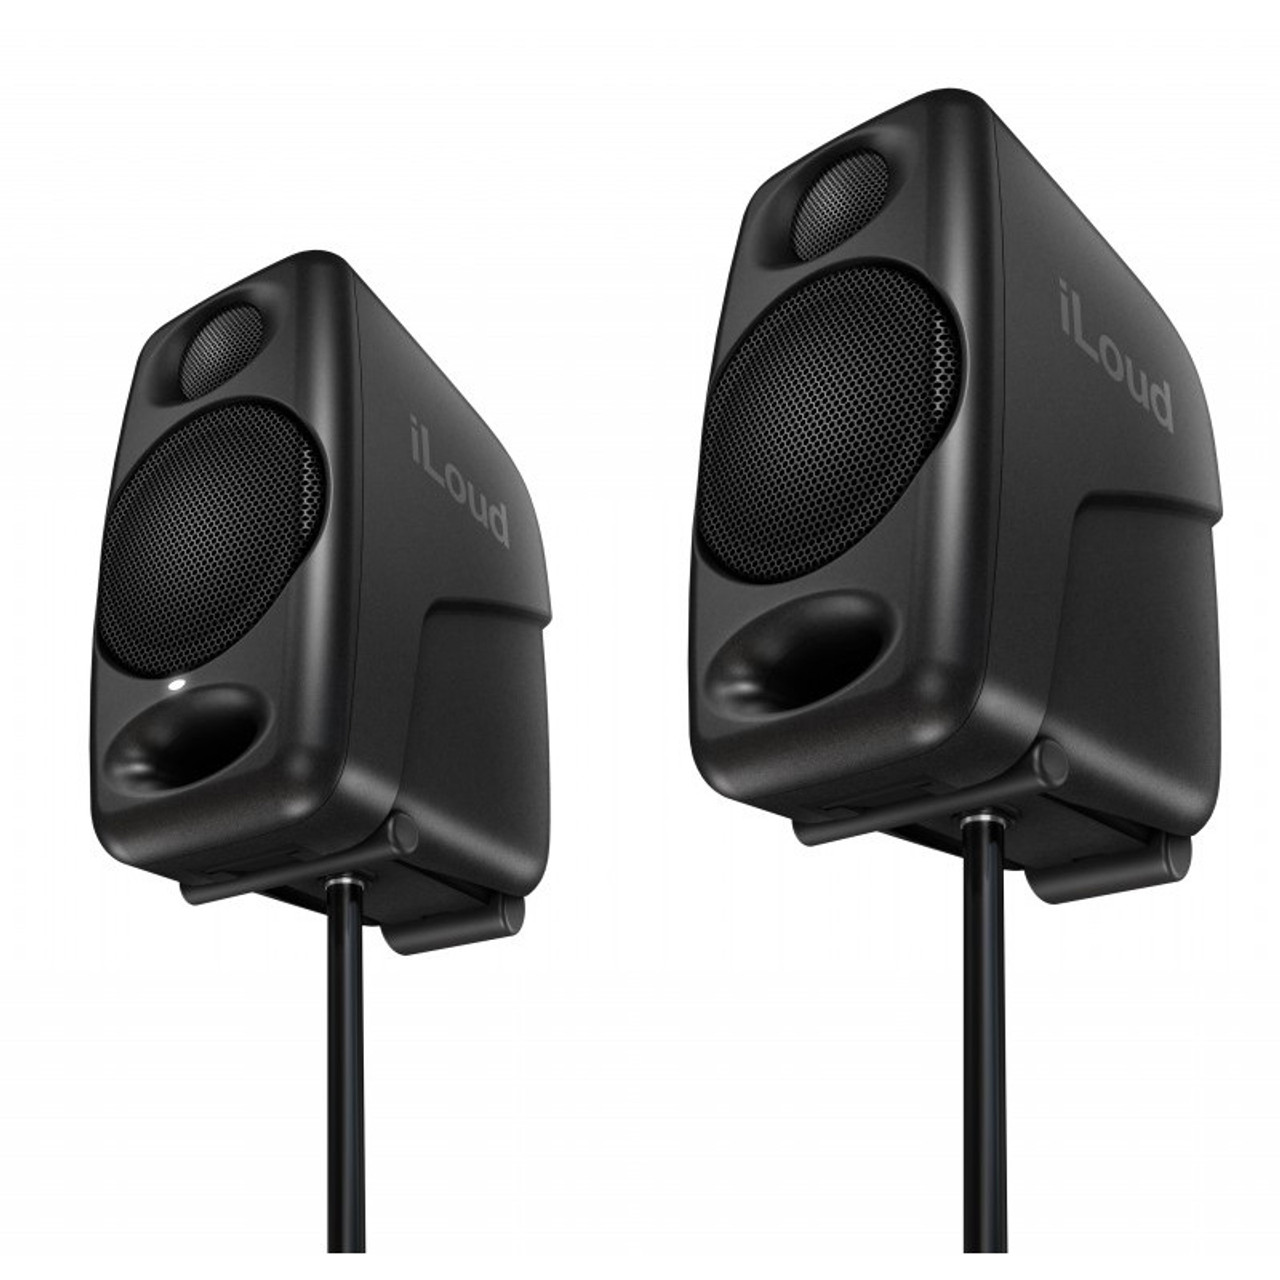  IK Multimedia iLoud Micro Monitor 50 watt Portable Wireless  Bluetooth Studio Reference Monitors, Dual Speakers for Music Production,  Mixing, Mastering, Composing, producing and DJs : Musical Instruments